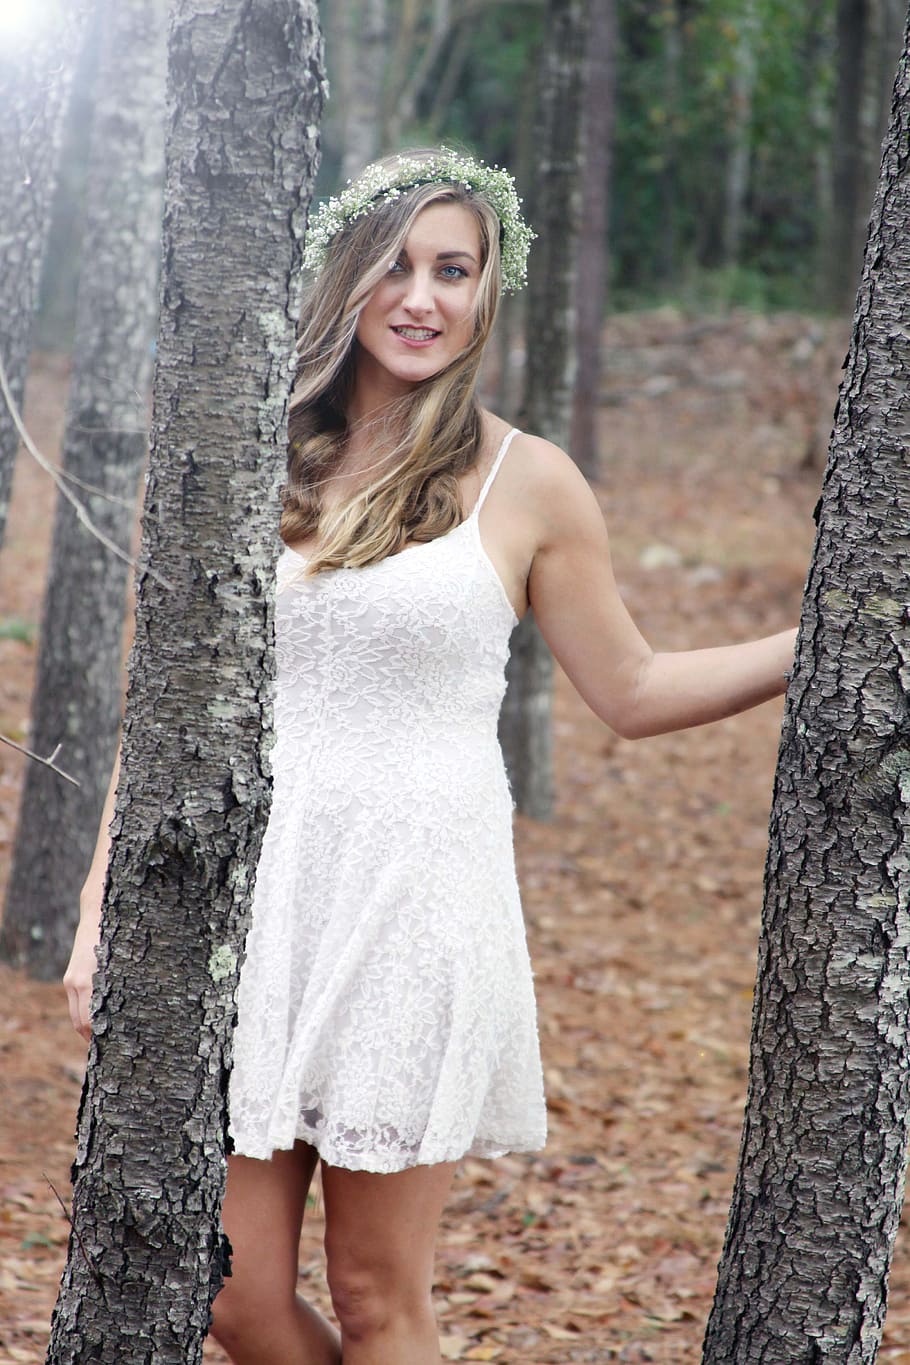 woman, natural, beauty, female, nature, trees, dress, model, outdoors, forest